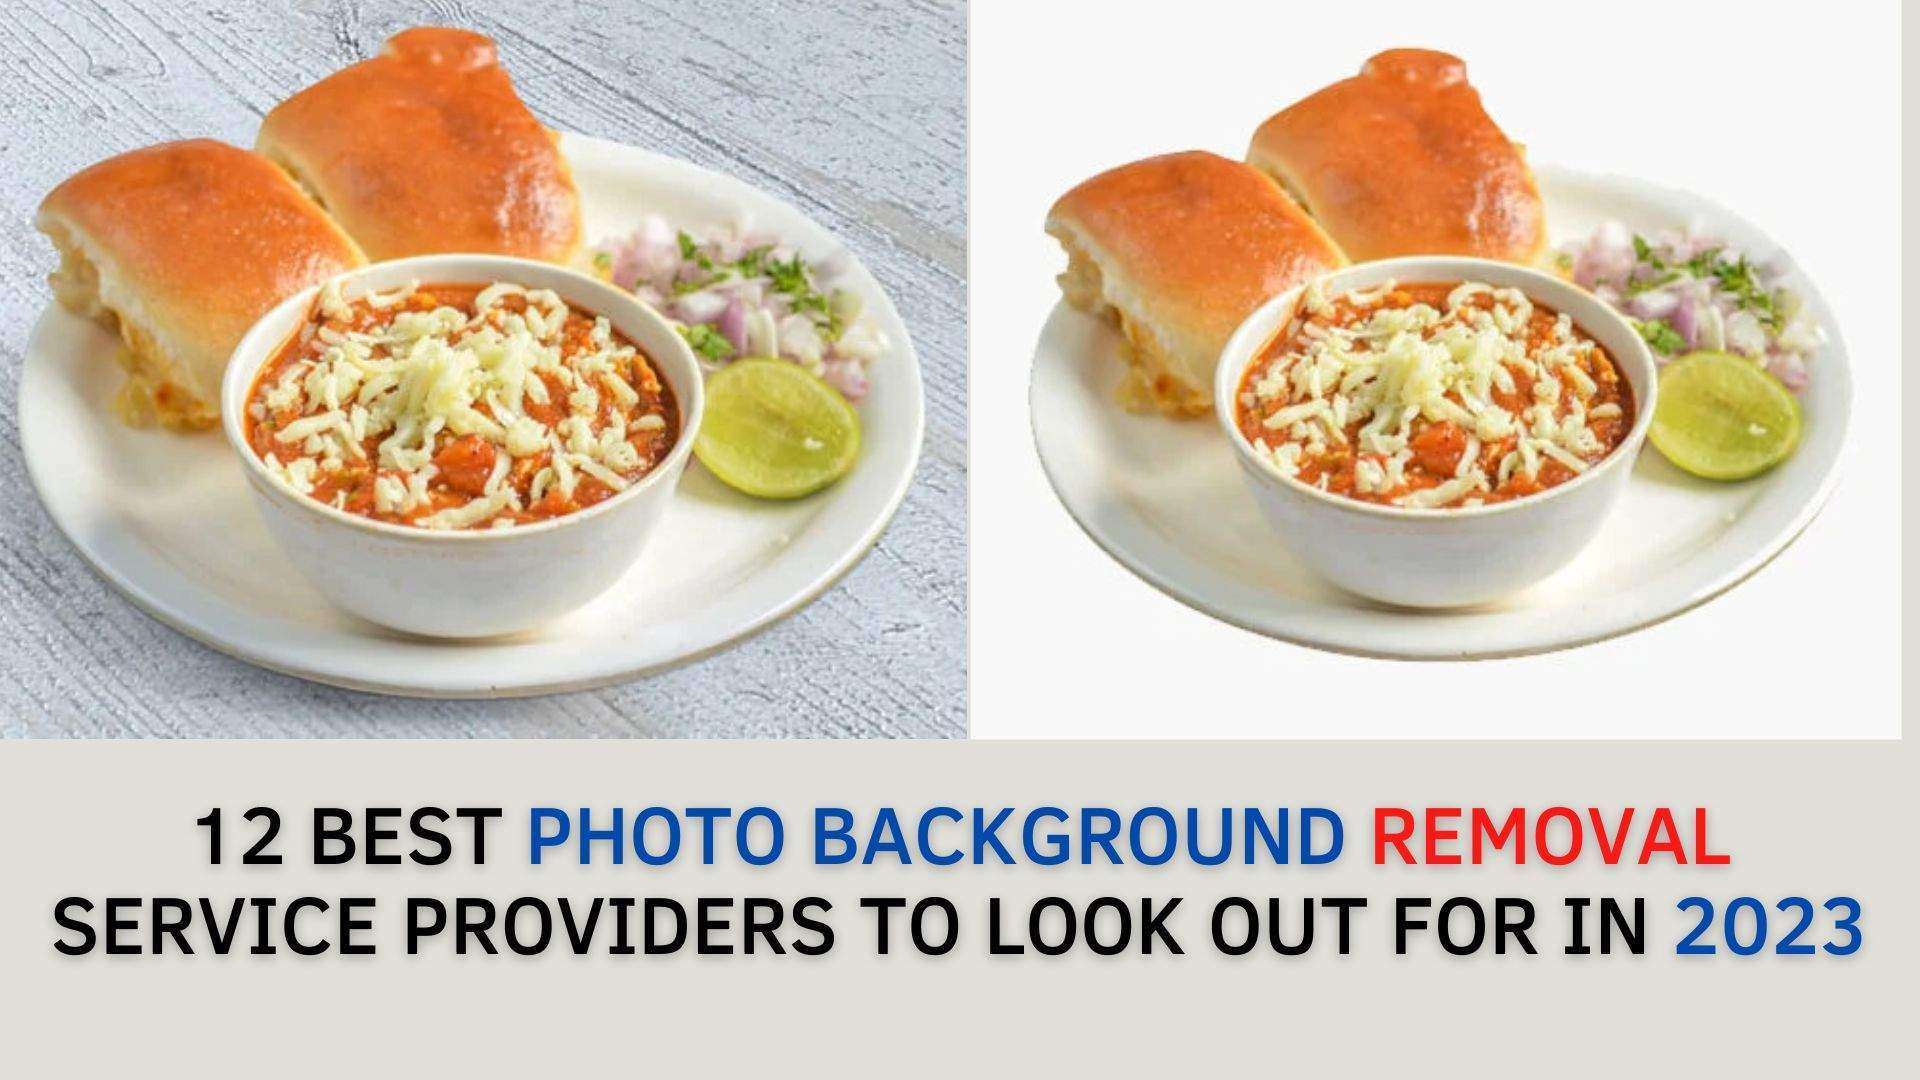 12 Best Photo Background Removal Service Providers to Look out for in 2023